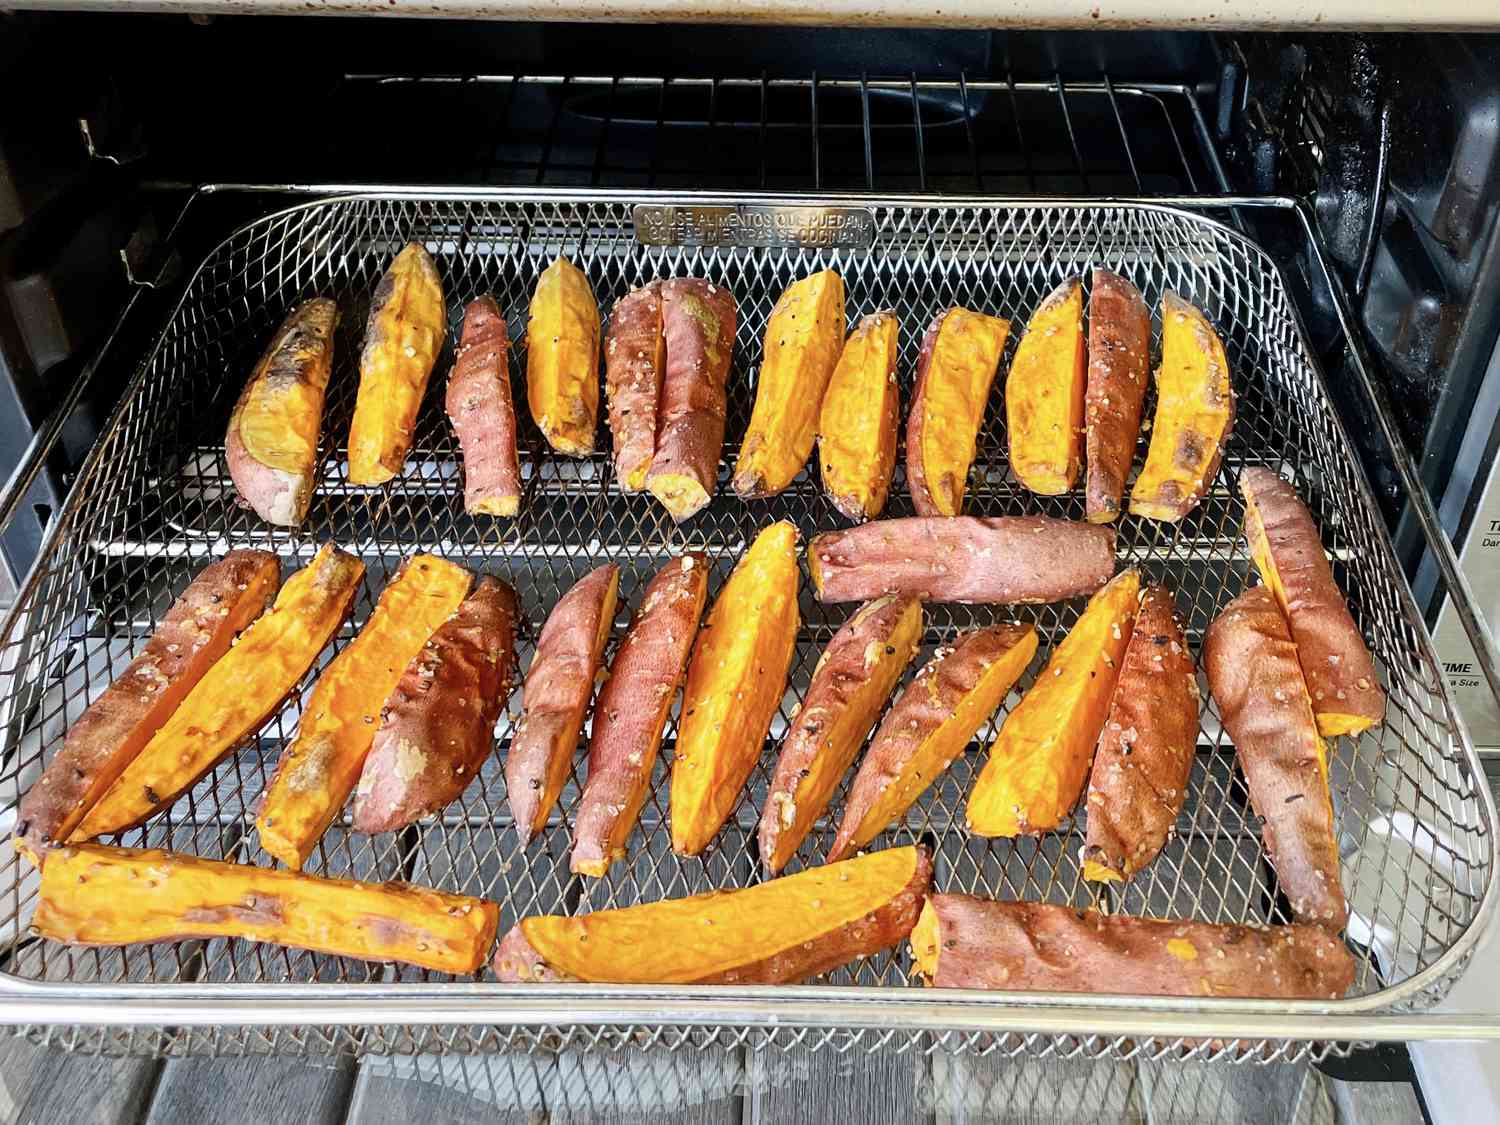 A metal basket of potato wedges in the Breville Smart Oven Air Fryer